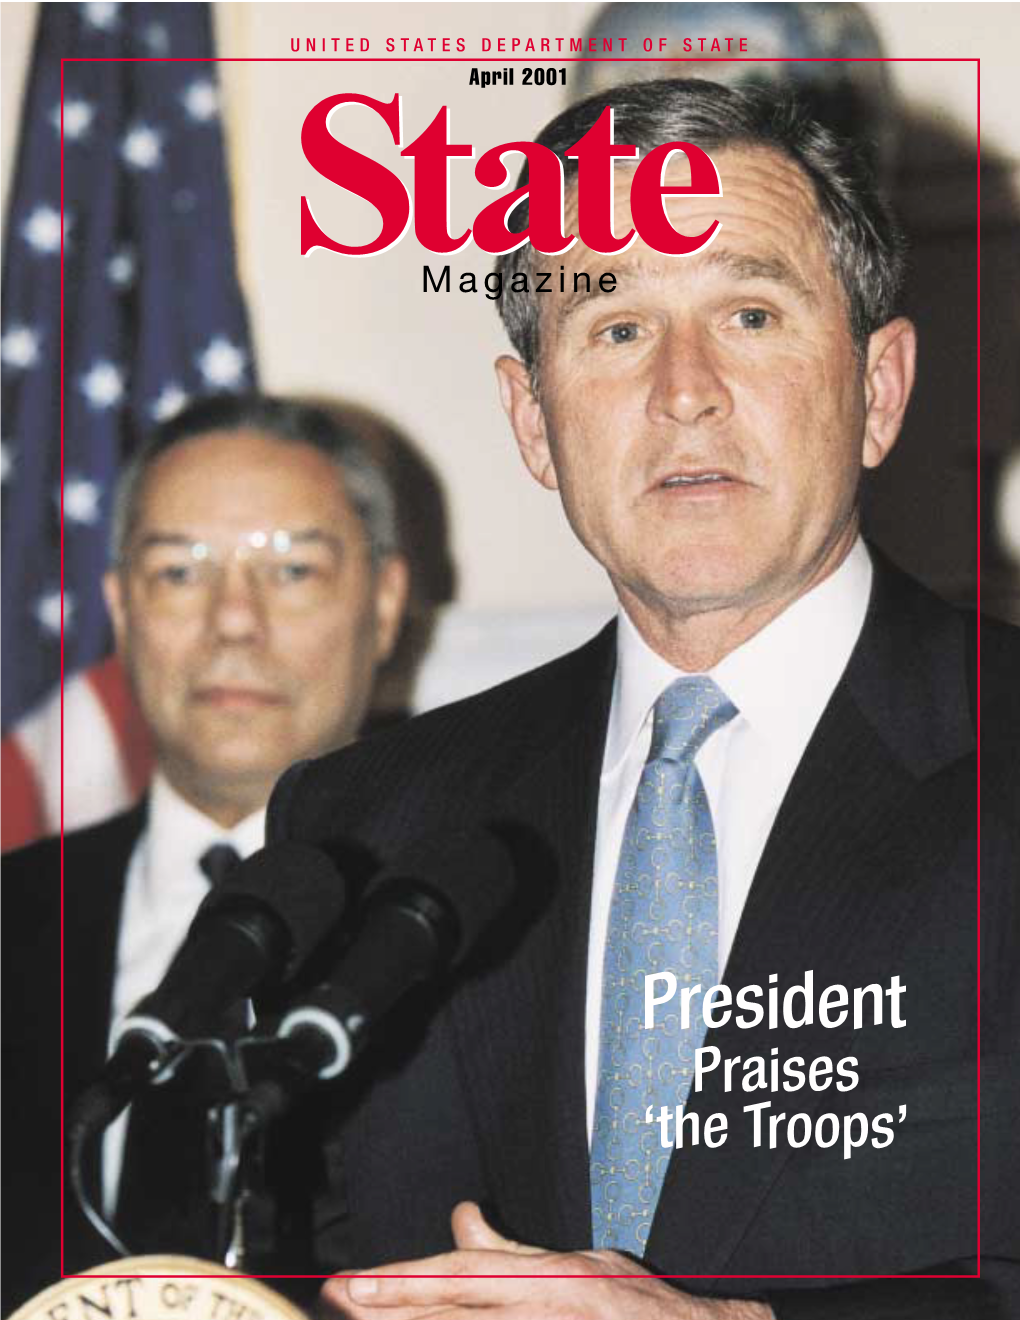 President Praises ‘The Troops’ Statestate Magazine April 2001 Contents No